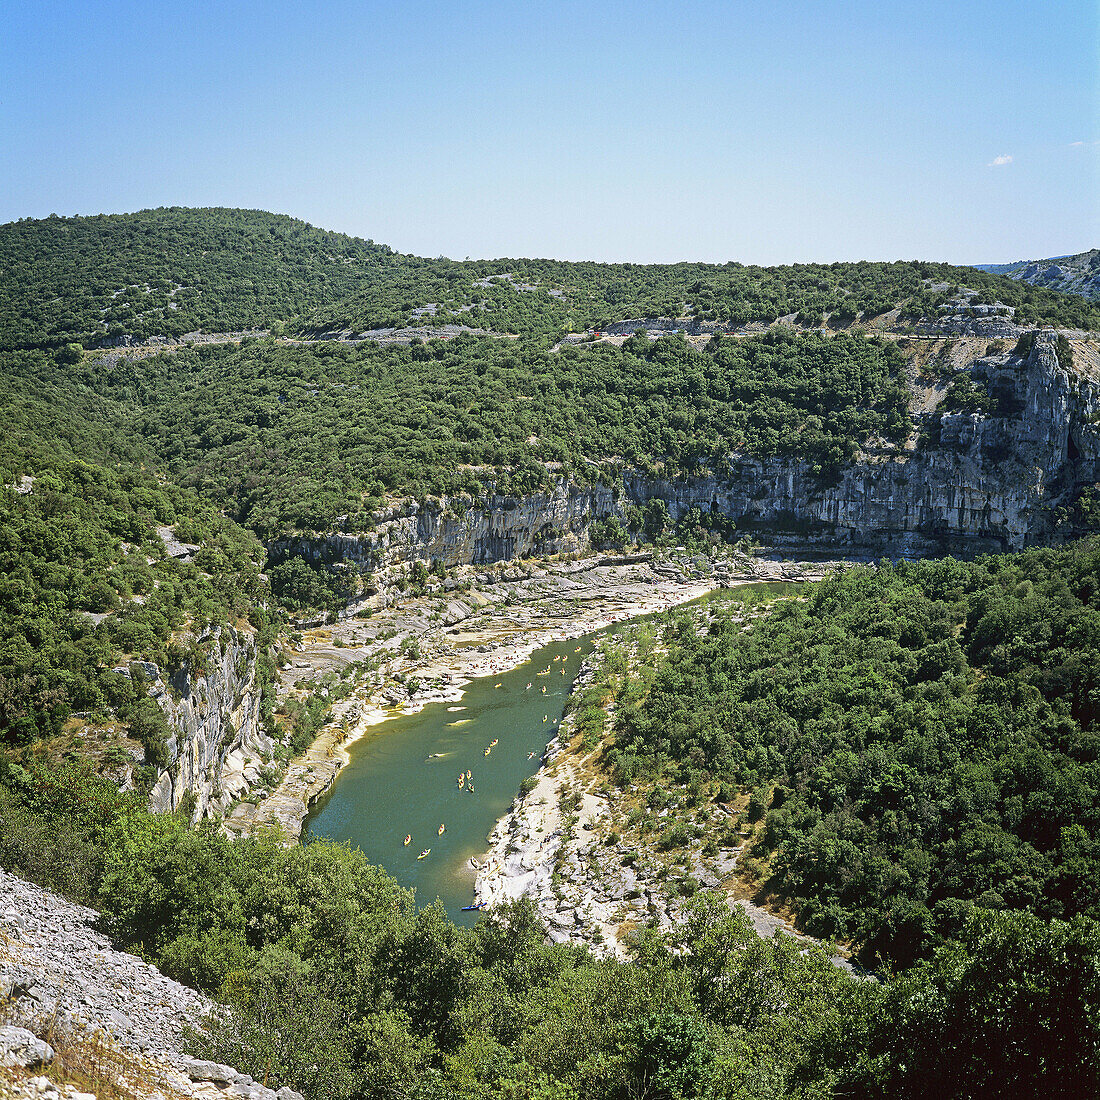 abrupt, Ardèche, attraction, blue, canoe, canyon, cliff, Color image, corniche, day, destination, discovery, ecosystem, Europe, forest, formation, France, French, geological, geology, gorge, green, Haute, landmark, Landscape, location, majestic, meander, 